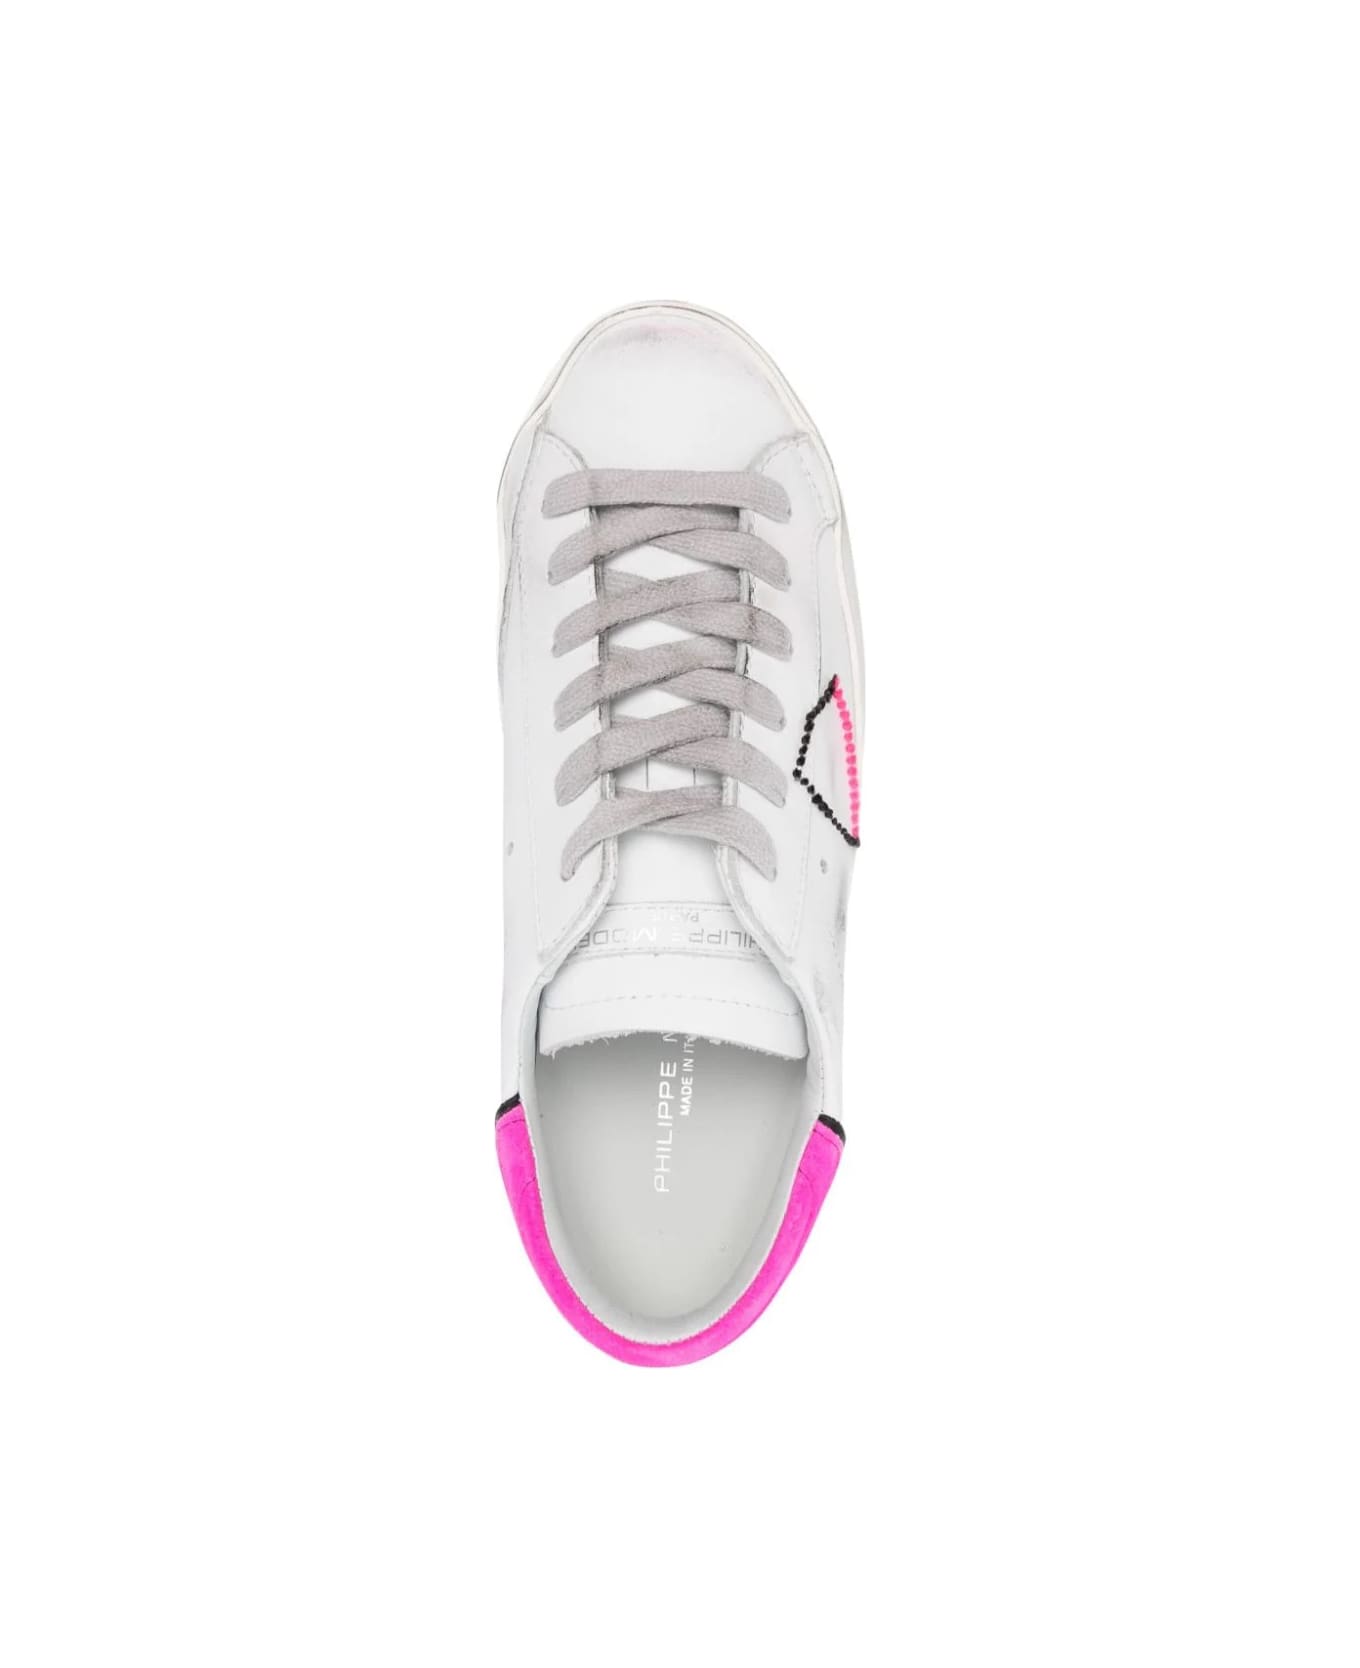 Philippe Model Prsx Low Sneakers - White And Fuchsia スニーカー